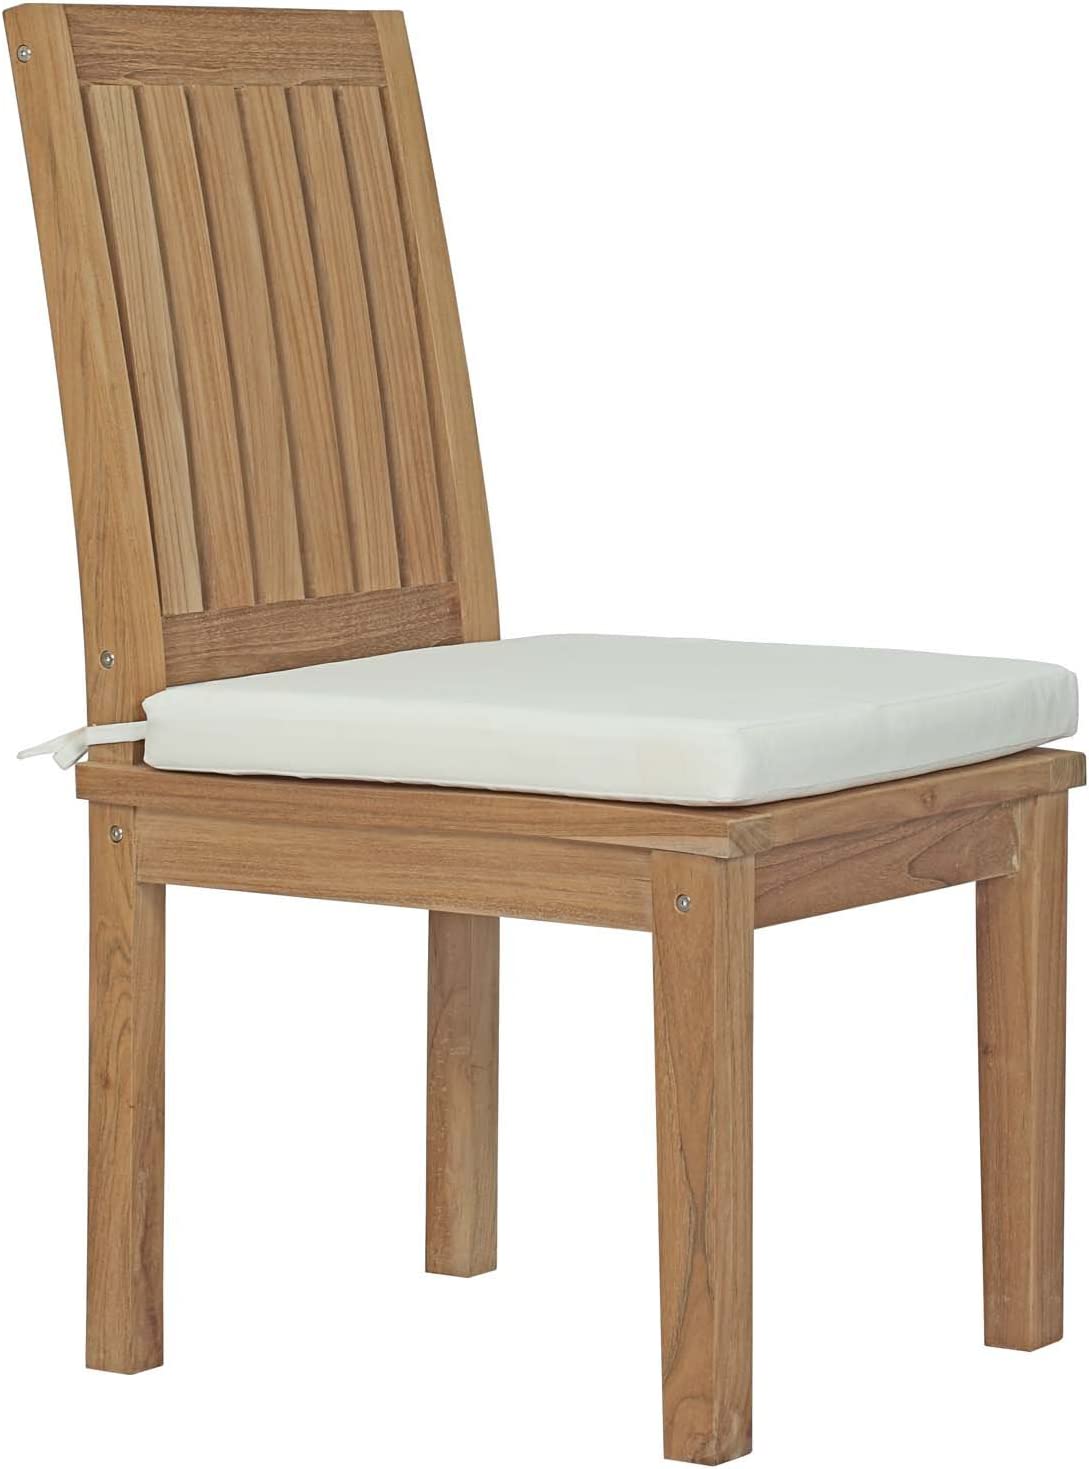 Modway EEI-2700-NAT-WHI Marina Premium Grade A Teak Wood Outdoor Patio, Dining Side Chair, Natural White